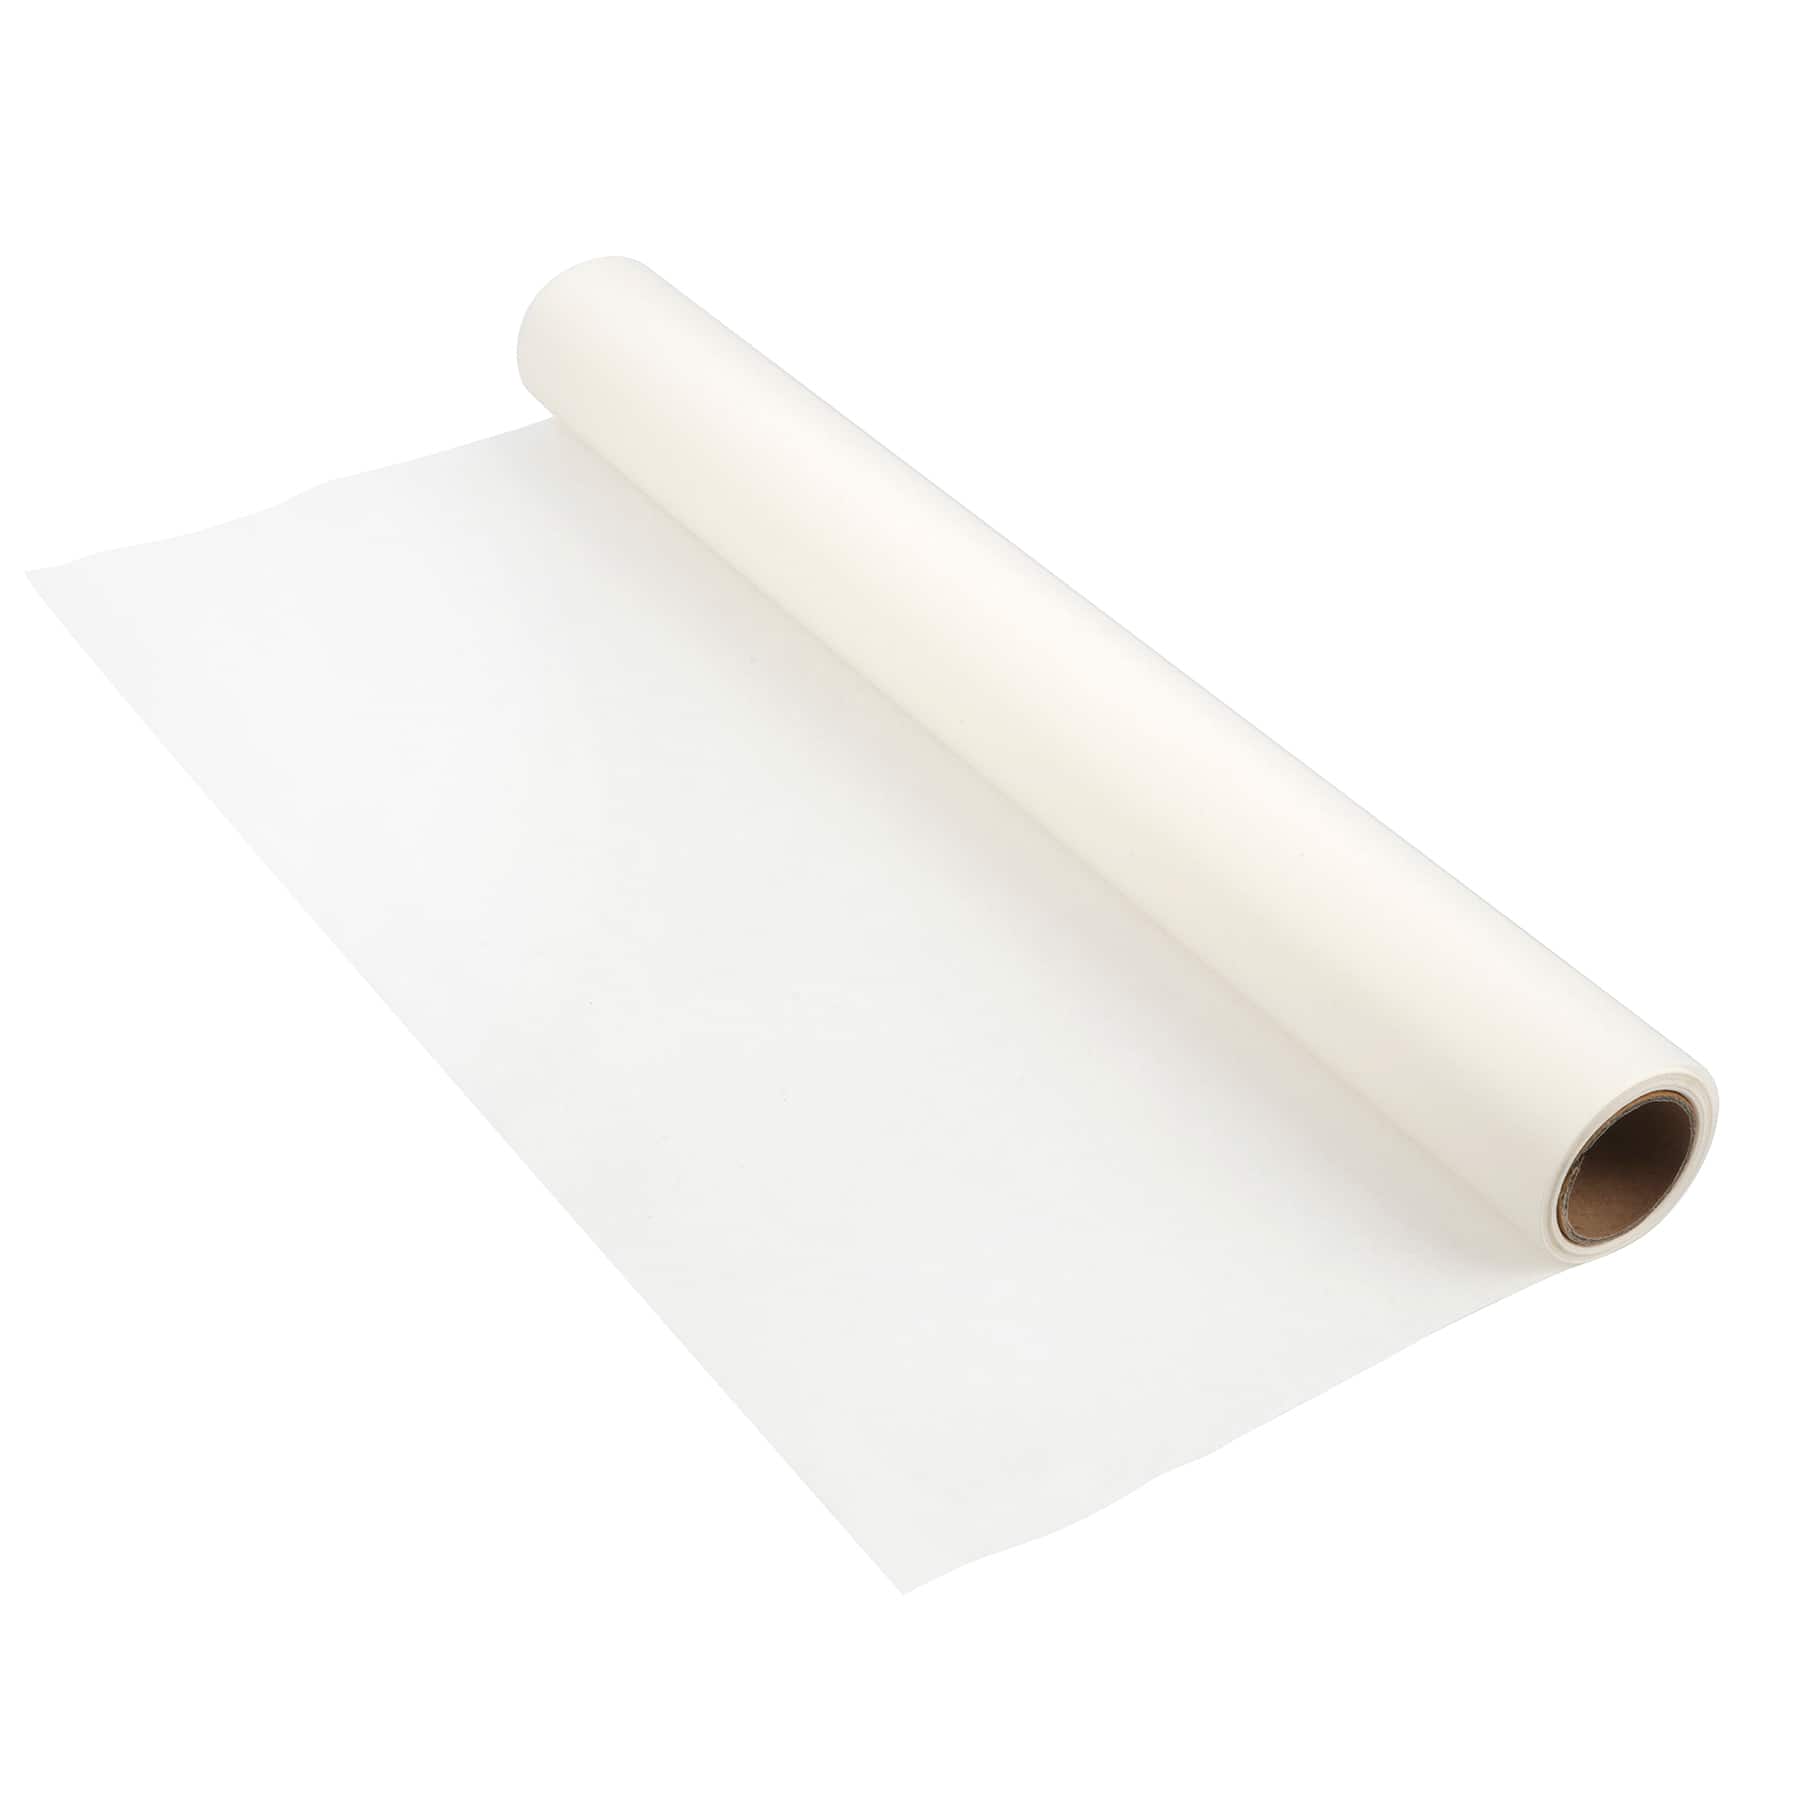 Parchment Paper Roll by Celebrate It in White | 1.25ft x 11yd | Michaels